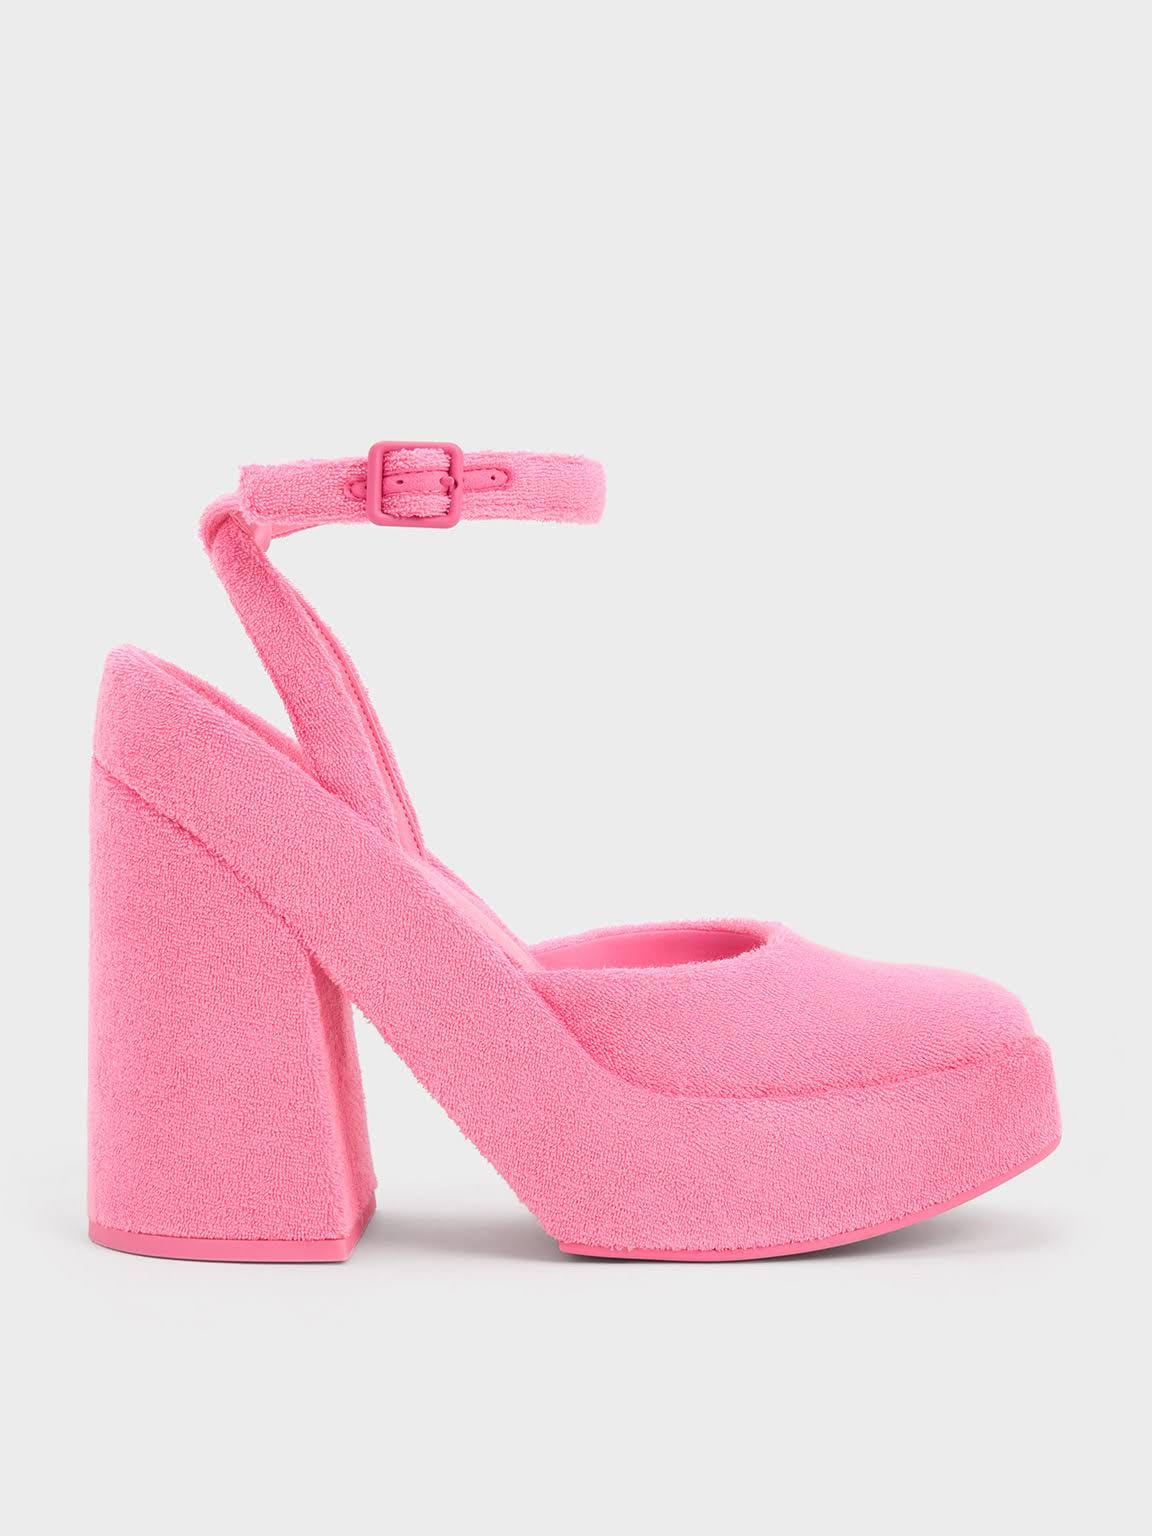 Stylish Pink Chunky Heels for Spring | Image